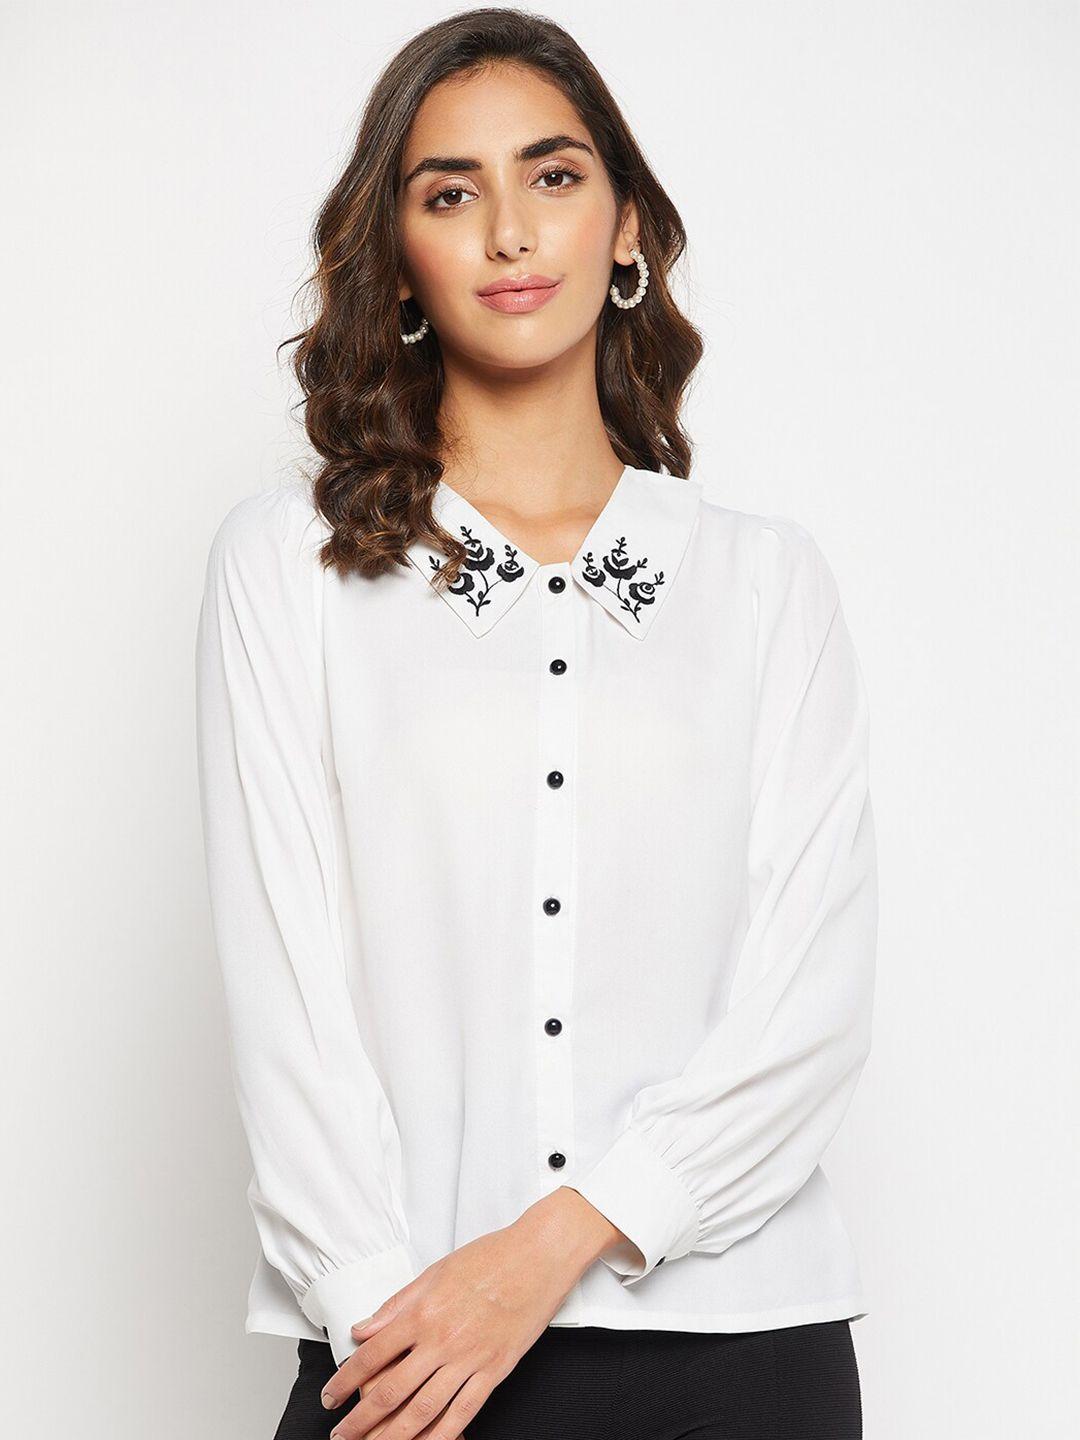 winered embroidered cuffed sleeves shirt style top